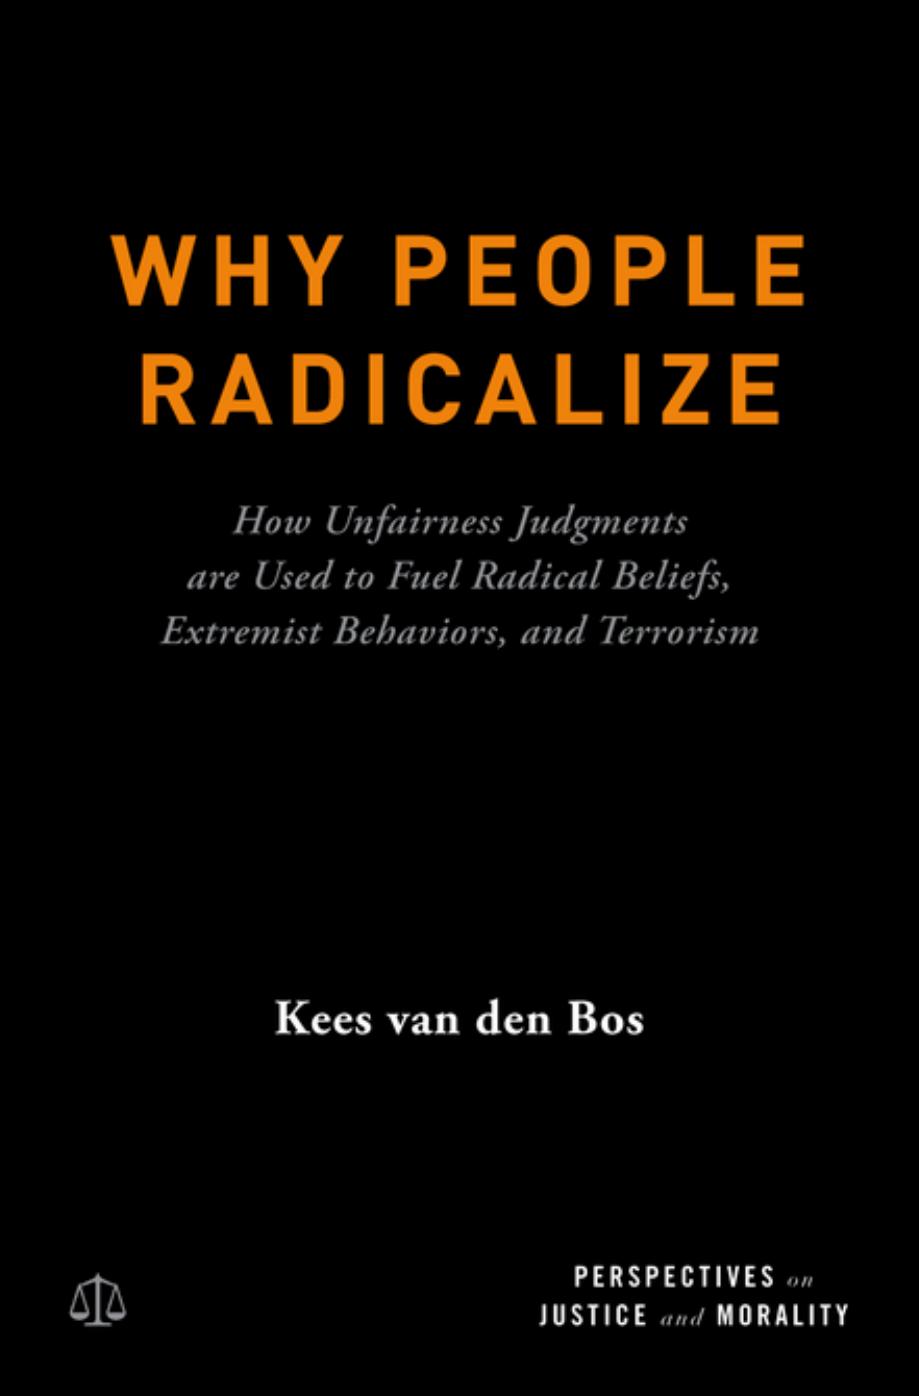 Why People Radicalize: How Unfairness Judgments are Used to Fuel Radical Beliefs, Extremist Behaviors, and Terrorism by Kees Van Den Bos